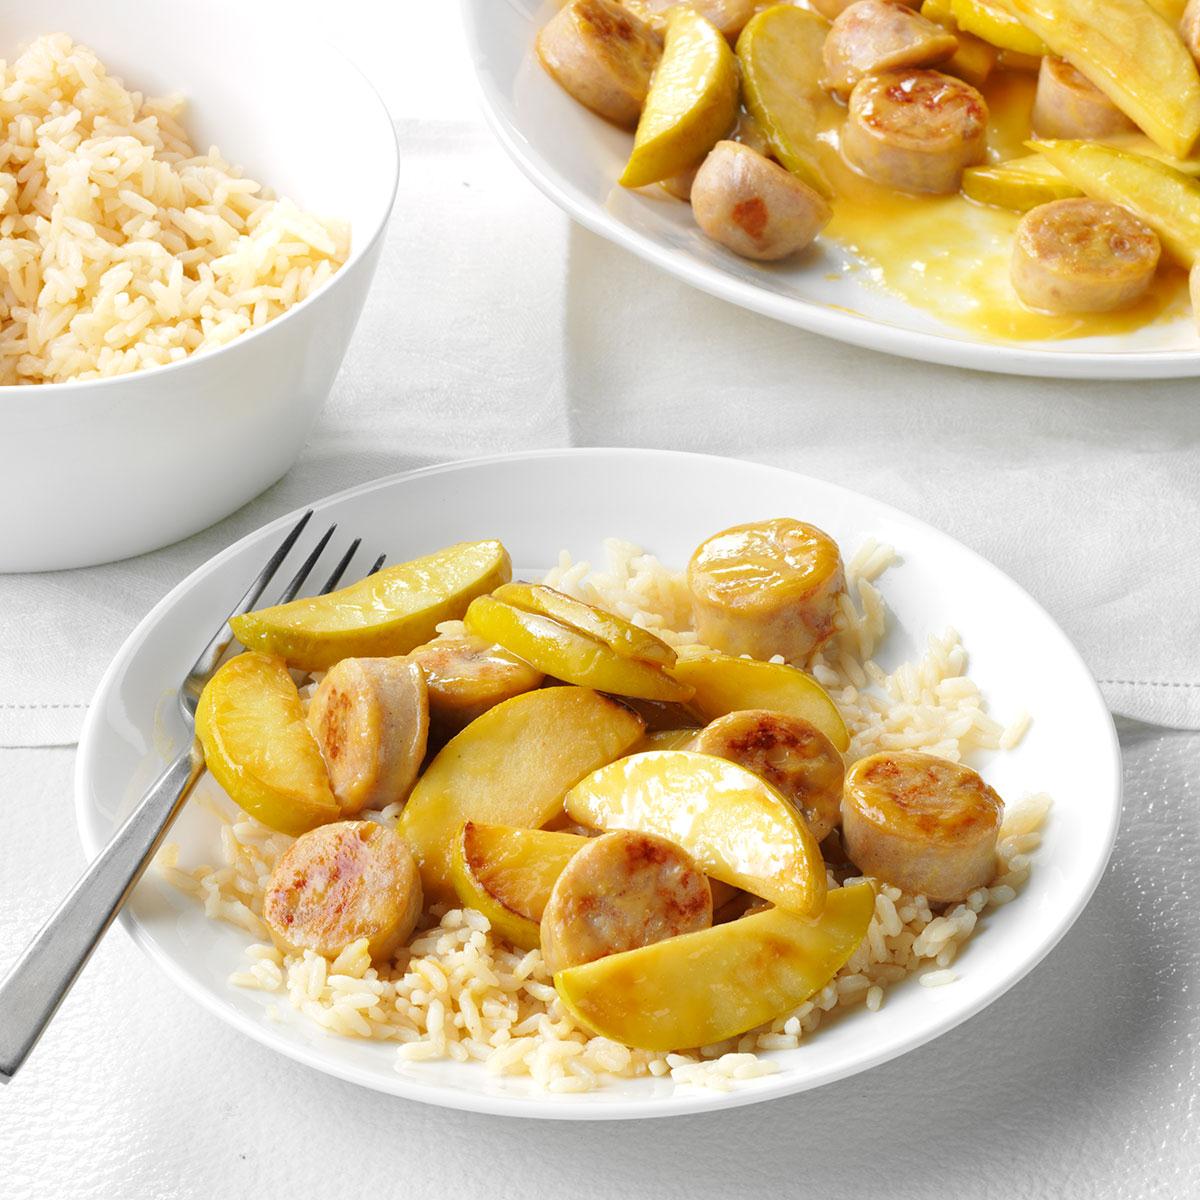 Chicken Apple Sausage Recipes : One Pan Chicken Apple Sausage Pasta Inspired By Charm Chicken Sausage Recipes Chicken Apple Sausage Flavorful Recipes - Add smoked sausage and 1 cup of water to a large sauté pan.